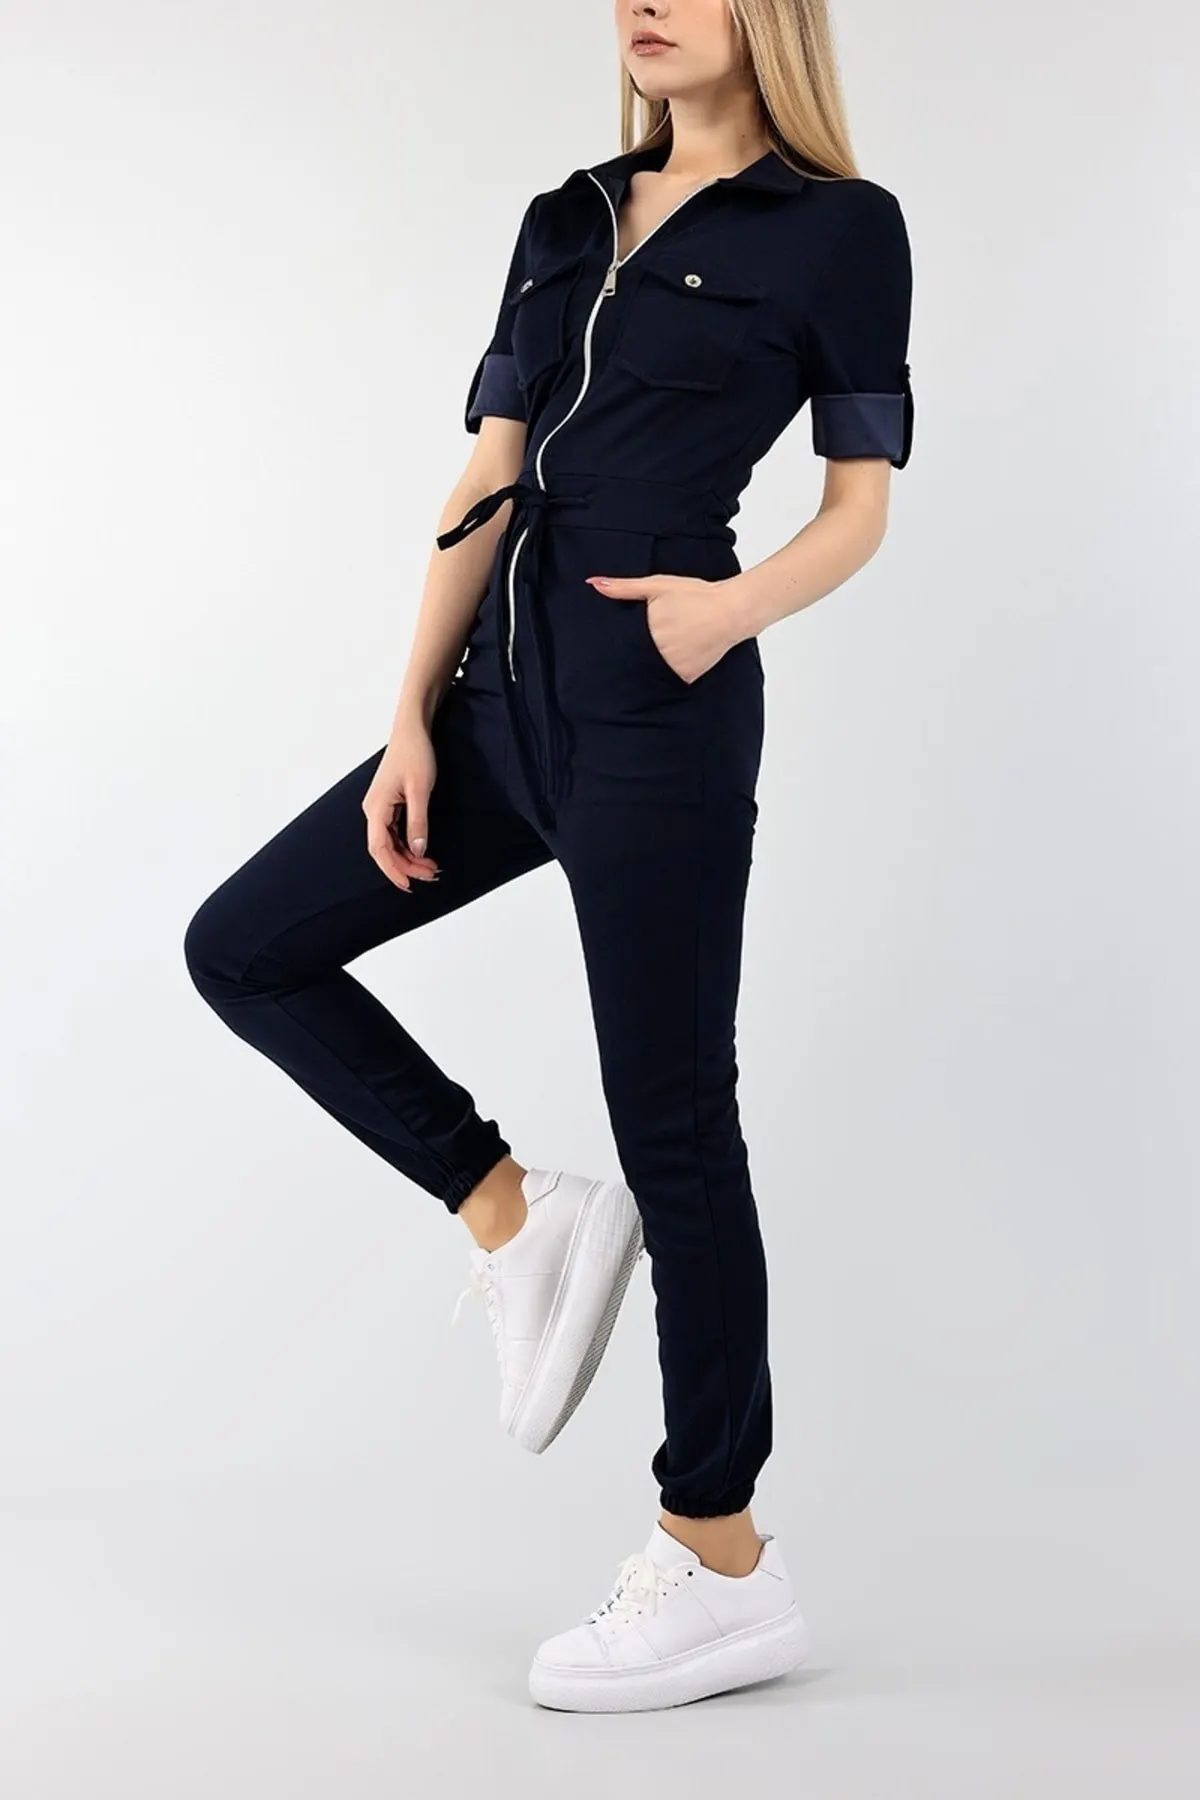 

Women's Overalls Navy Blue Zippered Sleeve Tie Crepe Jumpsuit Hot Casual Fashion Sleeveless Baggy Trousers